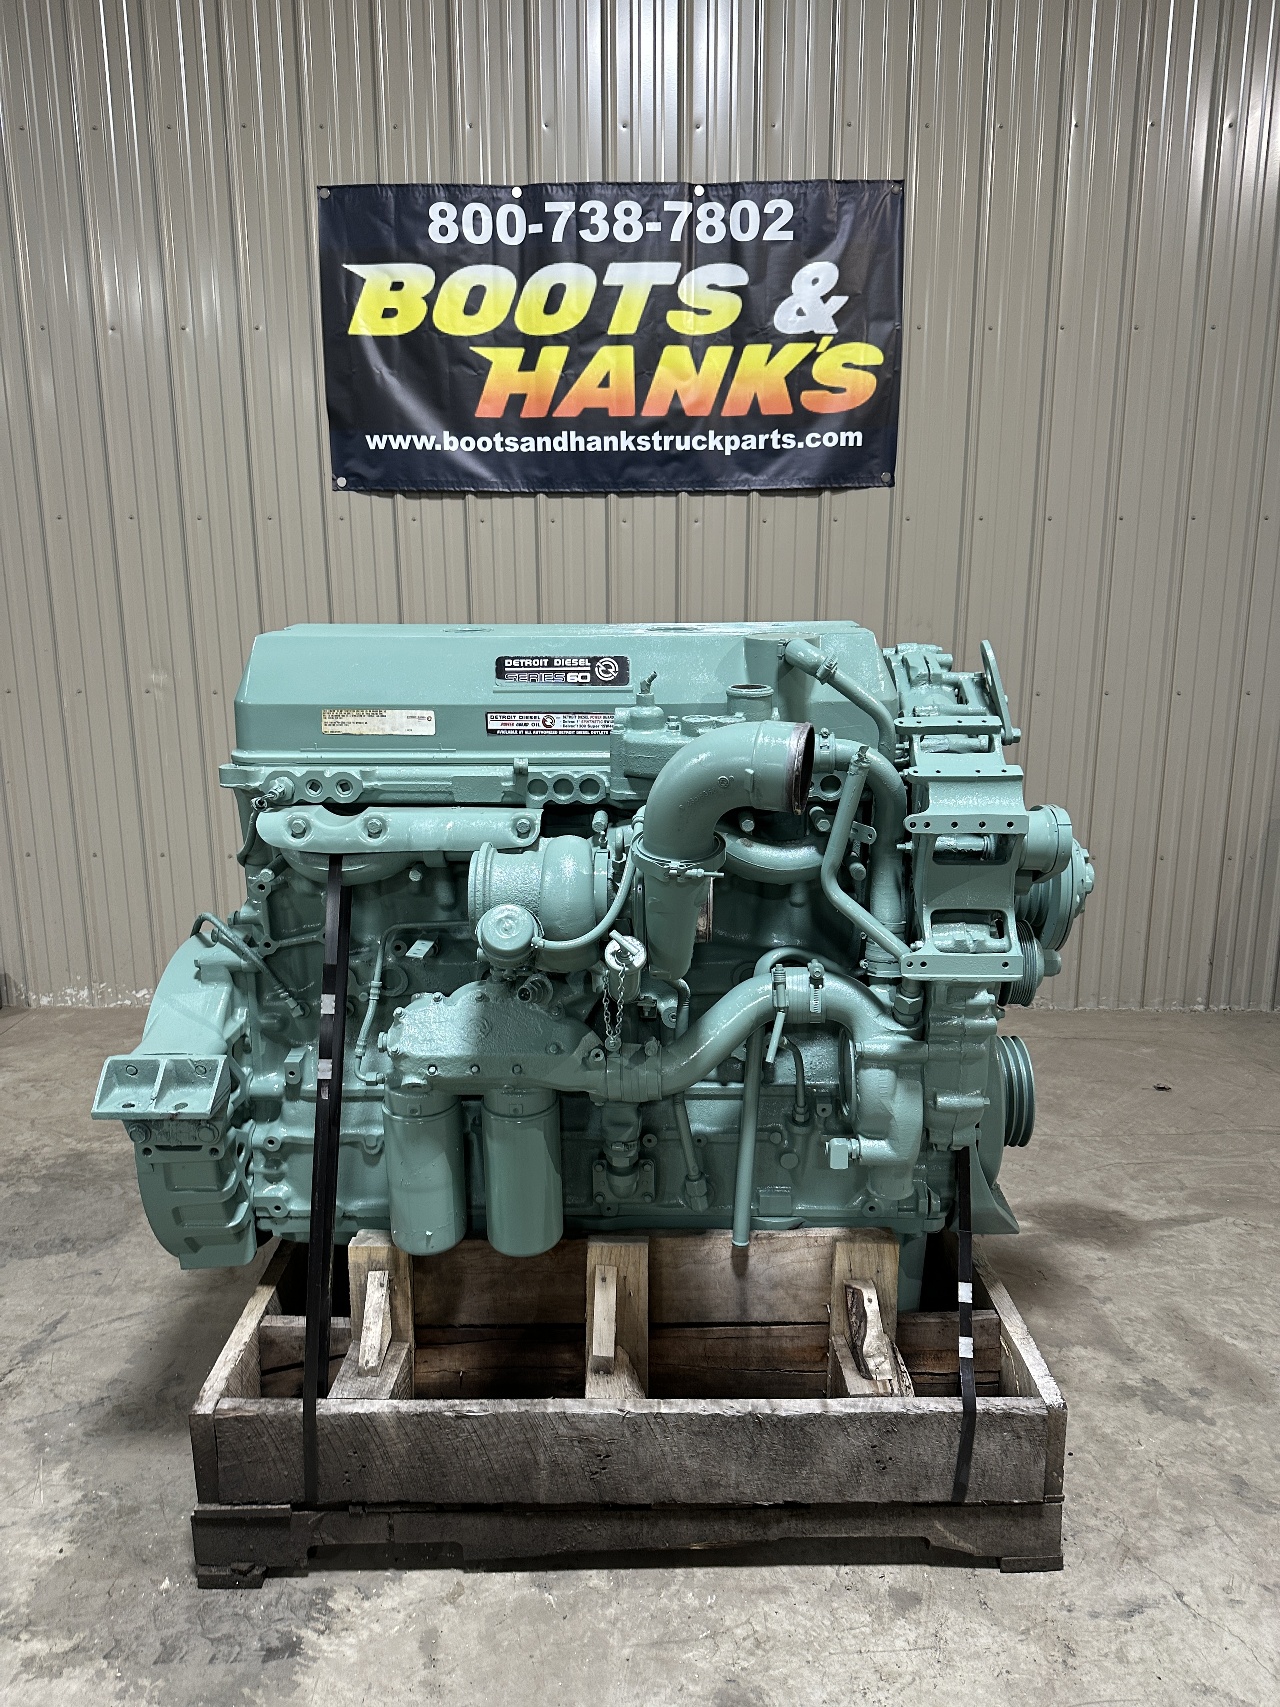 USED 1998 DETROIT 12.7 COMPLETE ENGINE TRUCK PARTS #1991